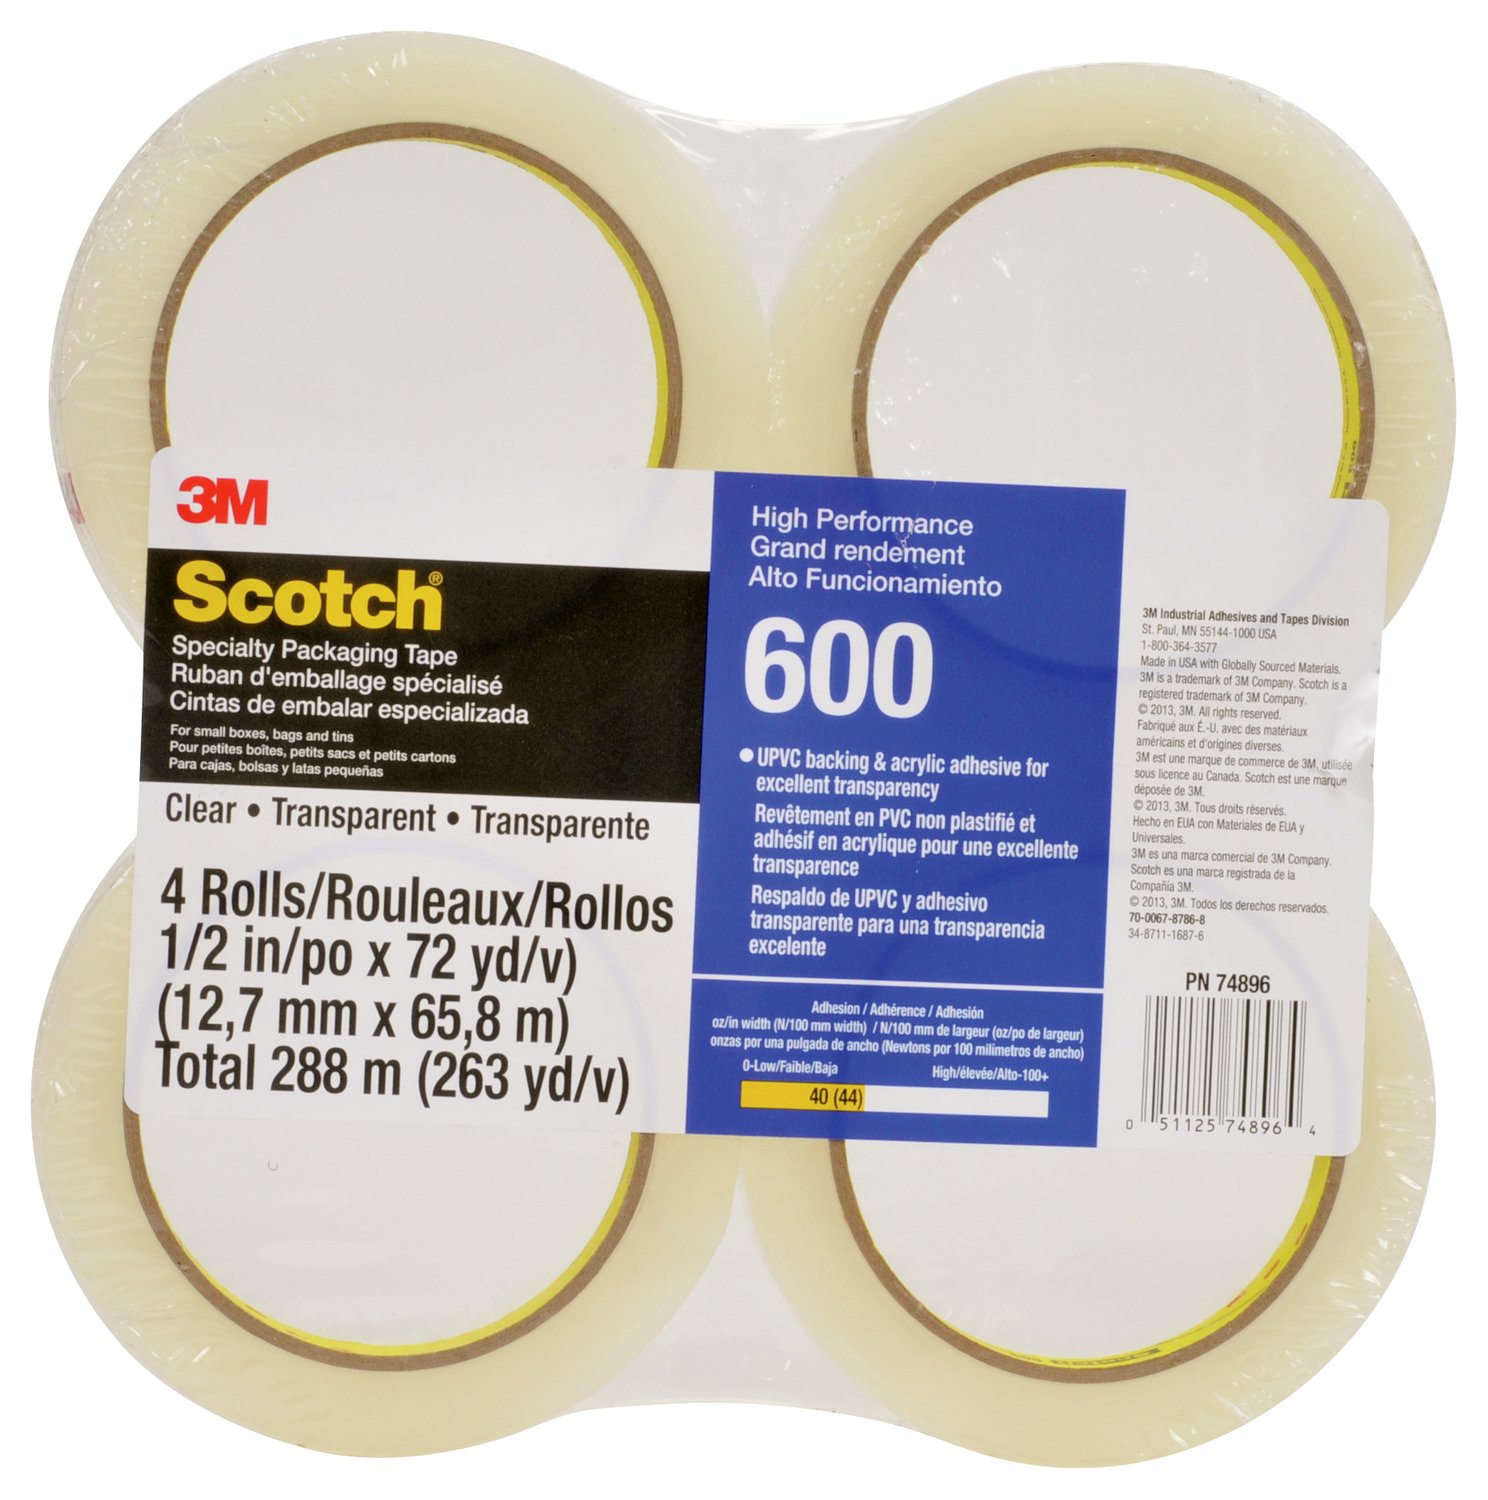 Scotch� Light Duty Packaging Tape 600 Clear High Clarity, 1/2 in x 72 yd